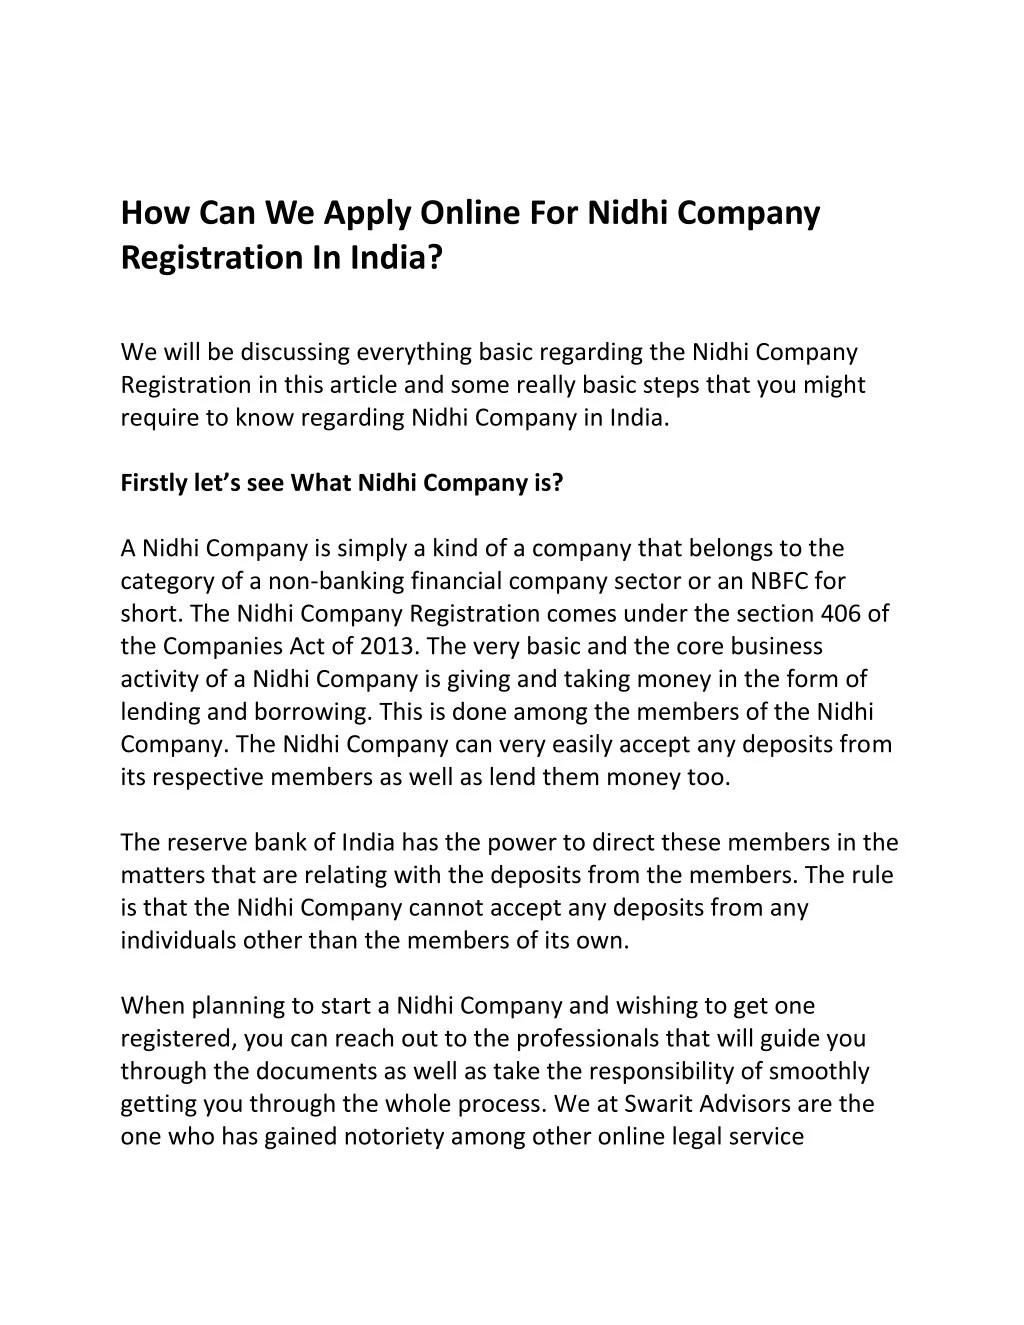 how can we apply online for nidhi company